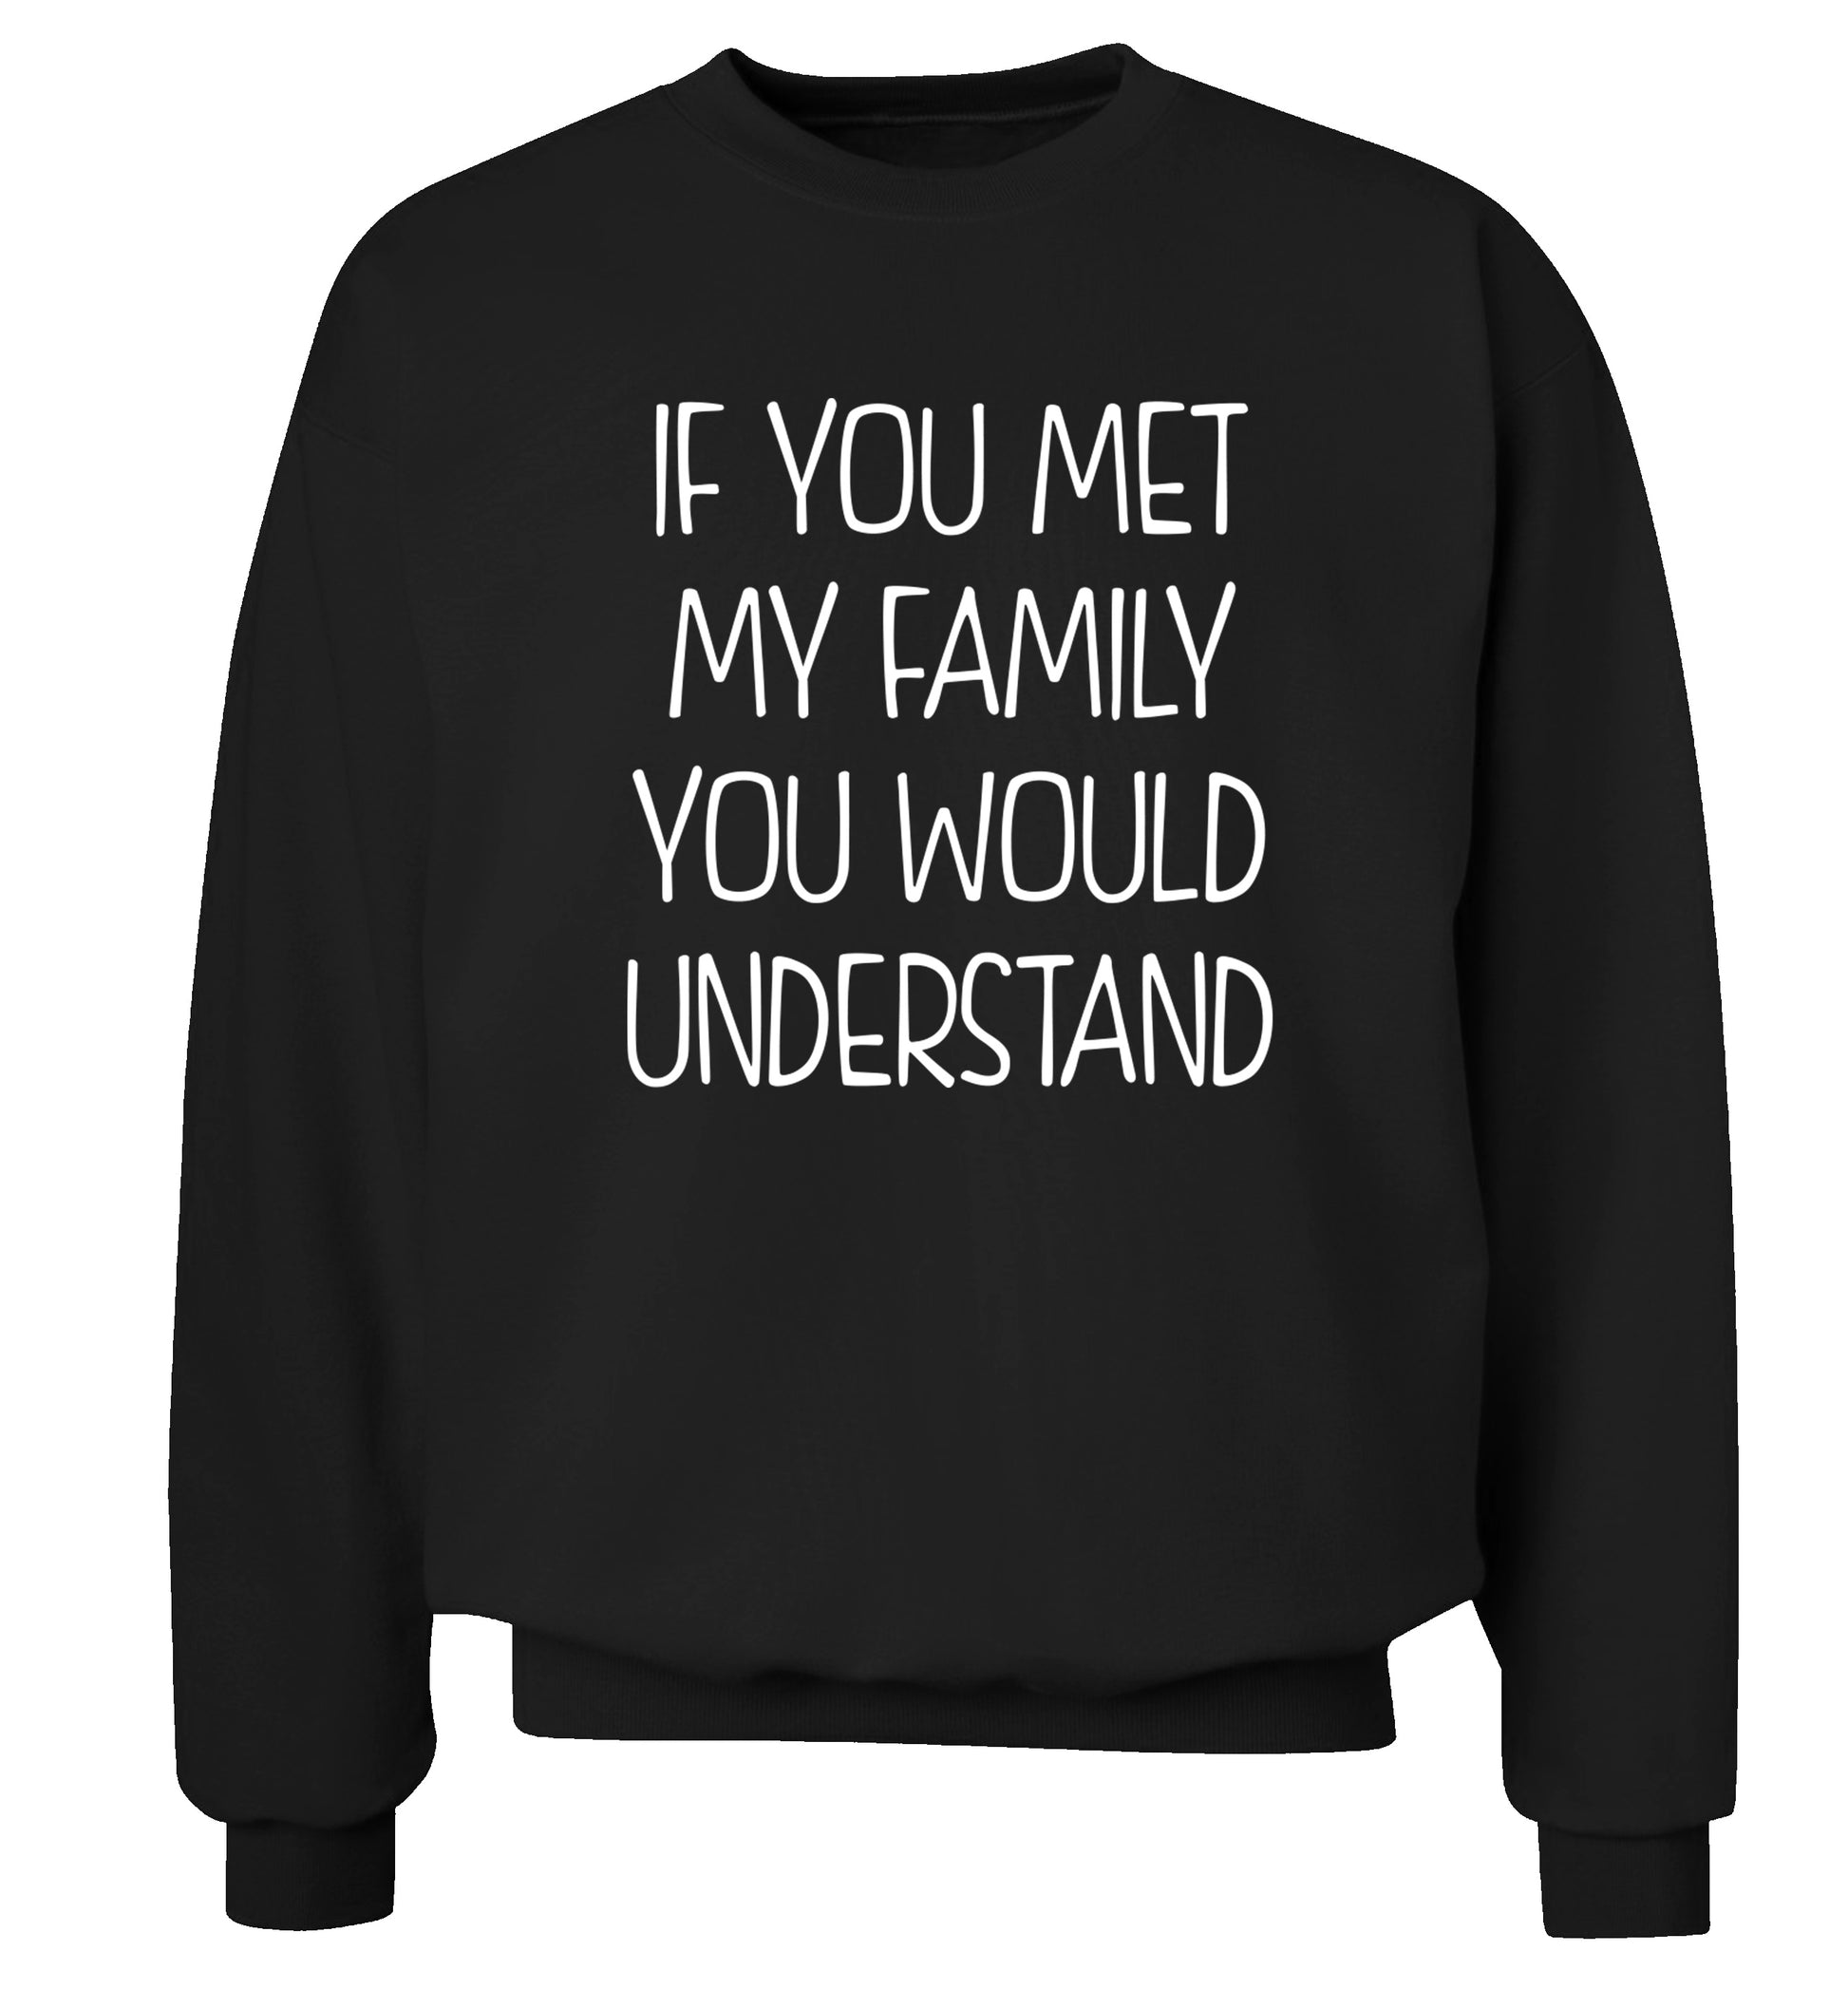 If you met my family you would understand Adult's unisex black Sweater 2XL